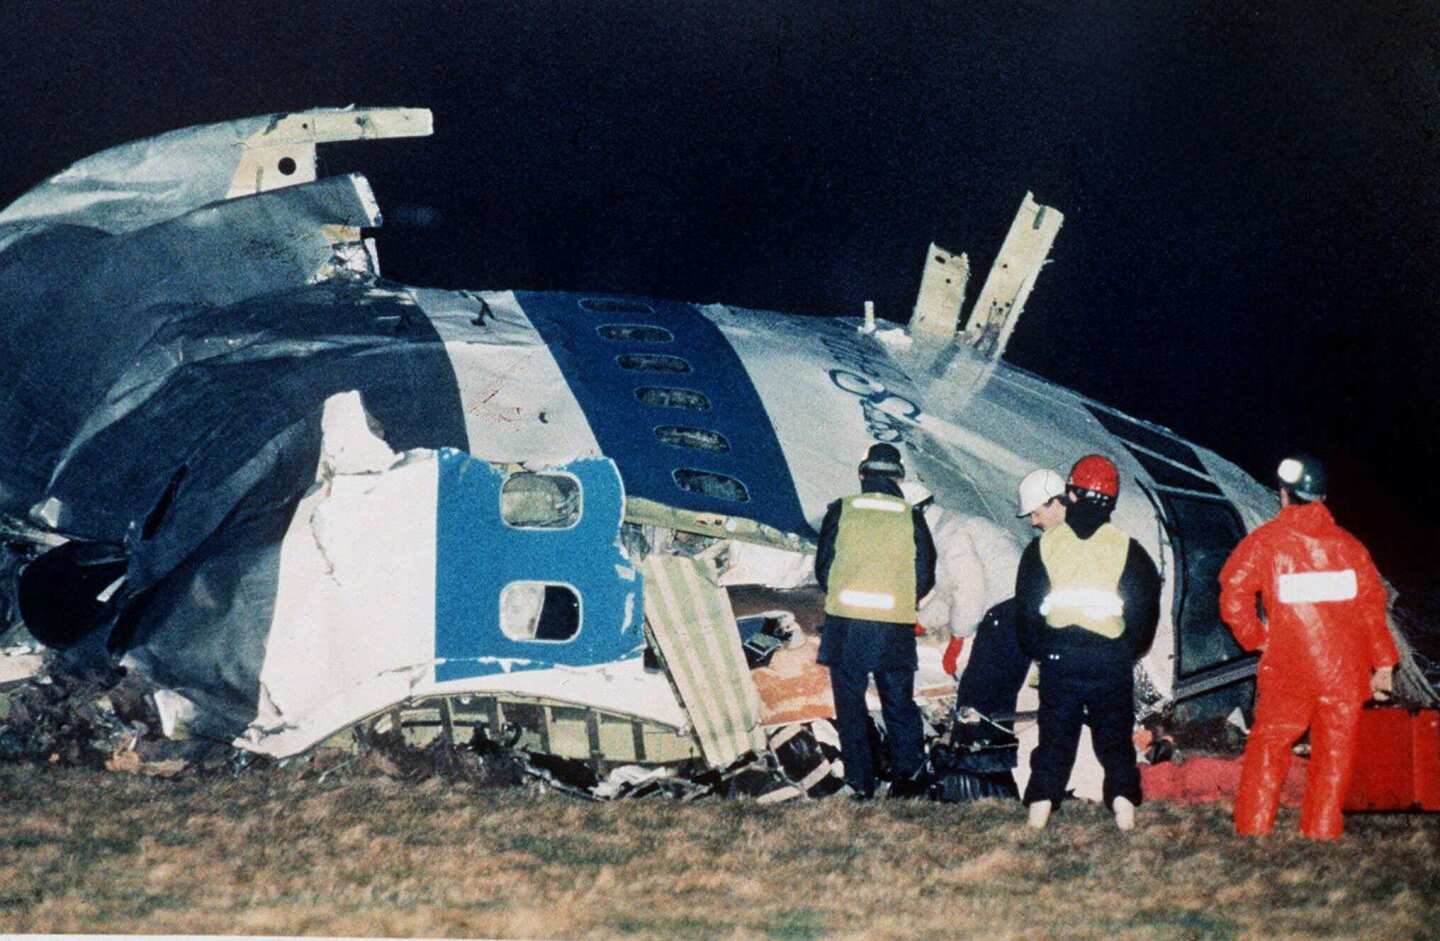 Rescue workers examine the nose of Pan Am flight 103 near the town of Lockerbie, Scotland,after a bomb aboard exploded and killed 270 people.